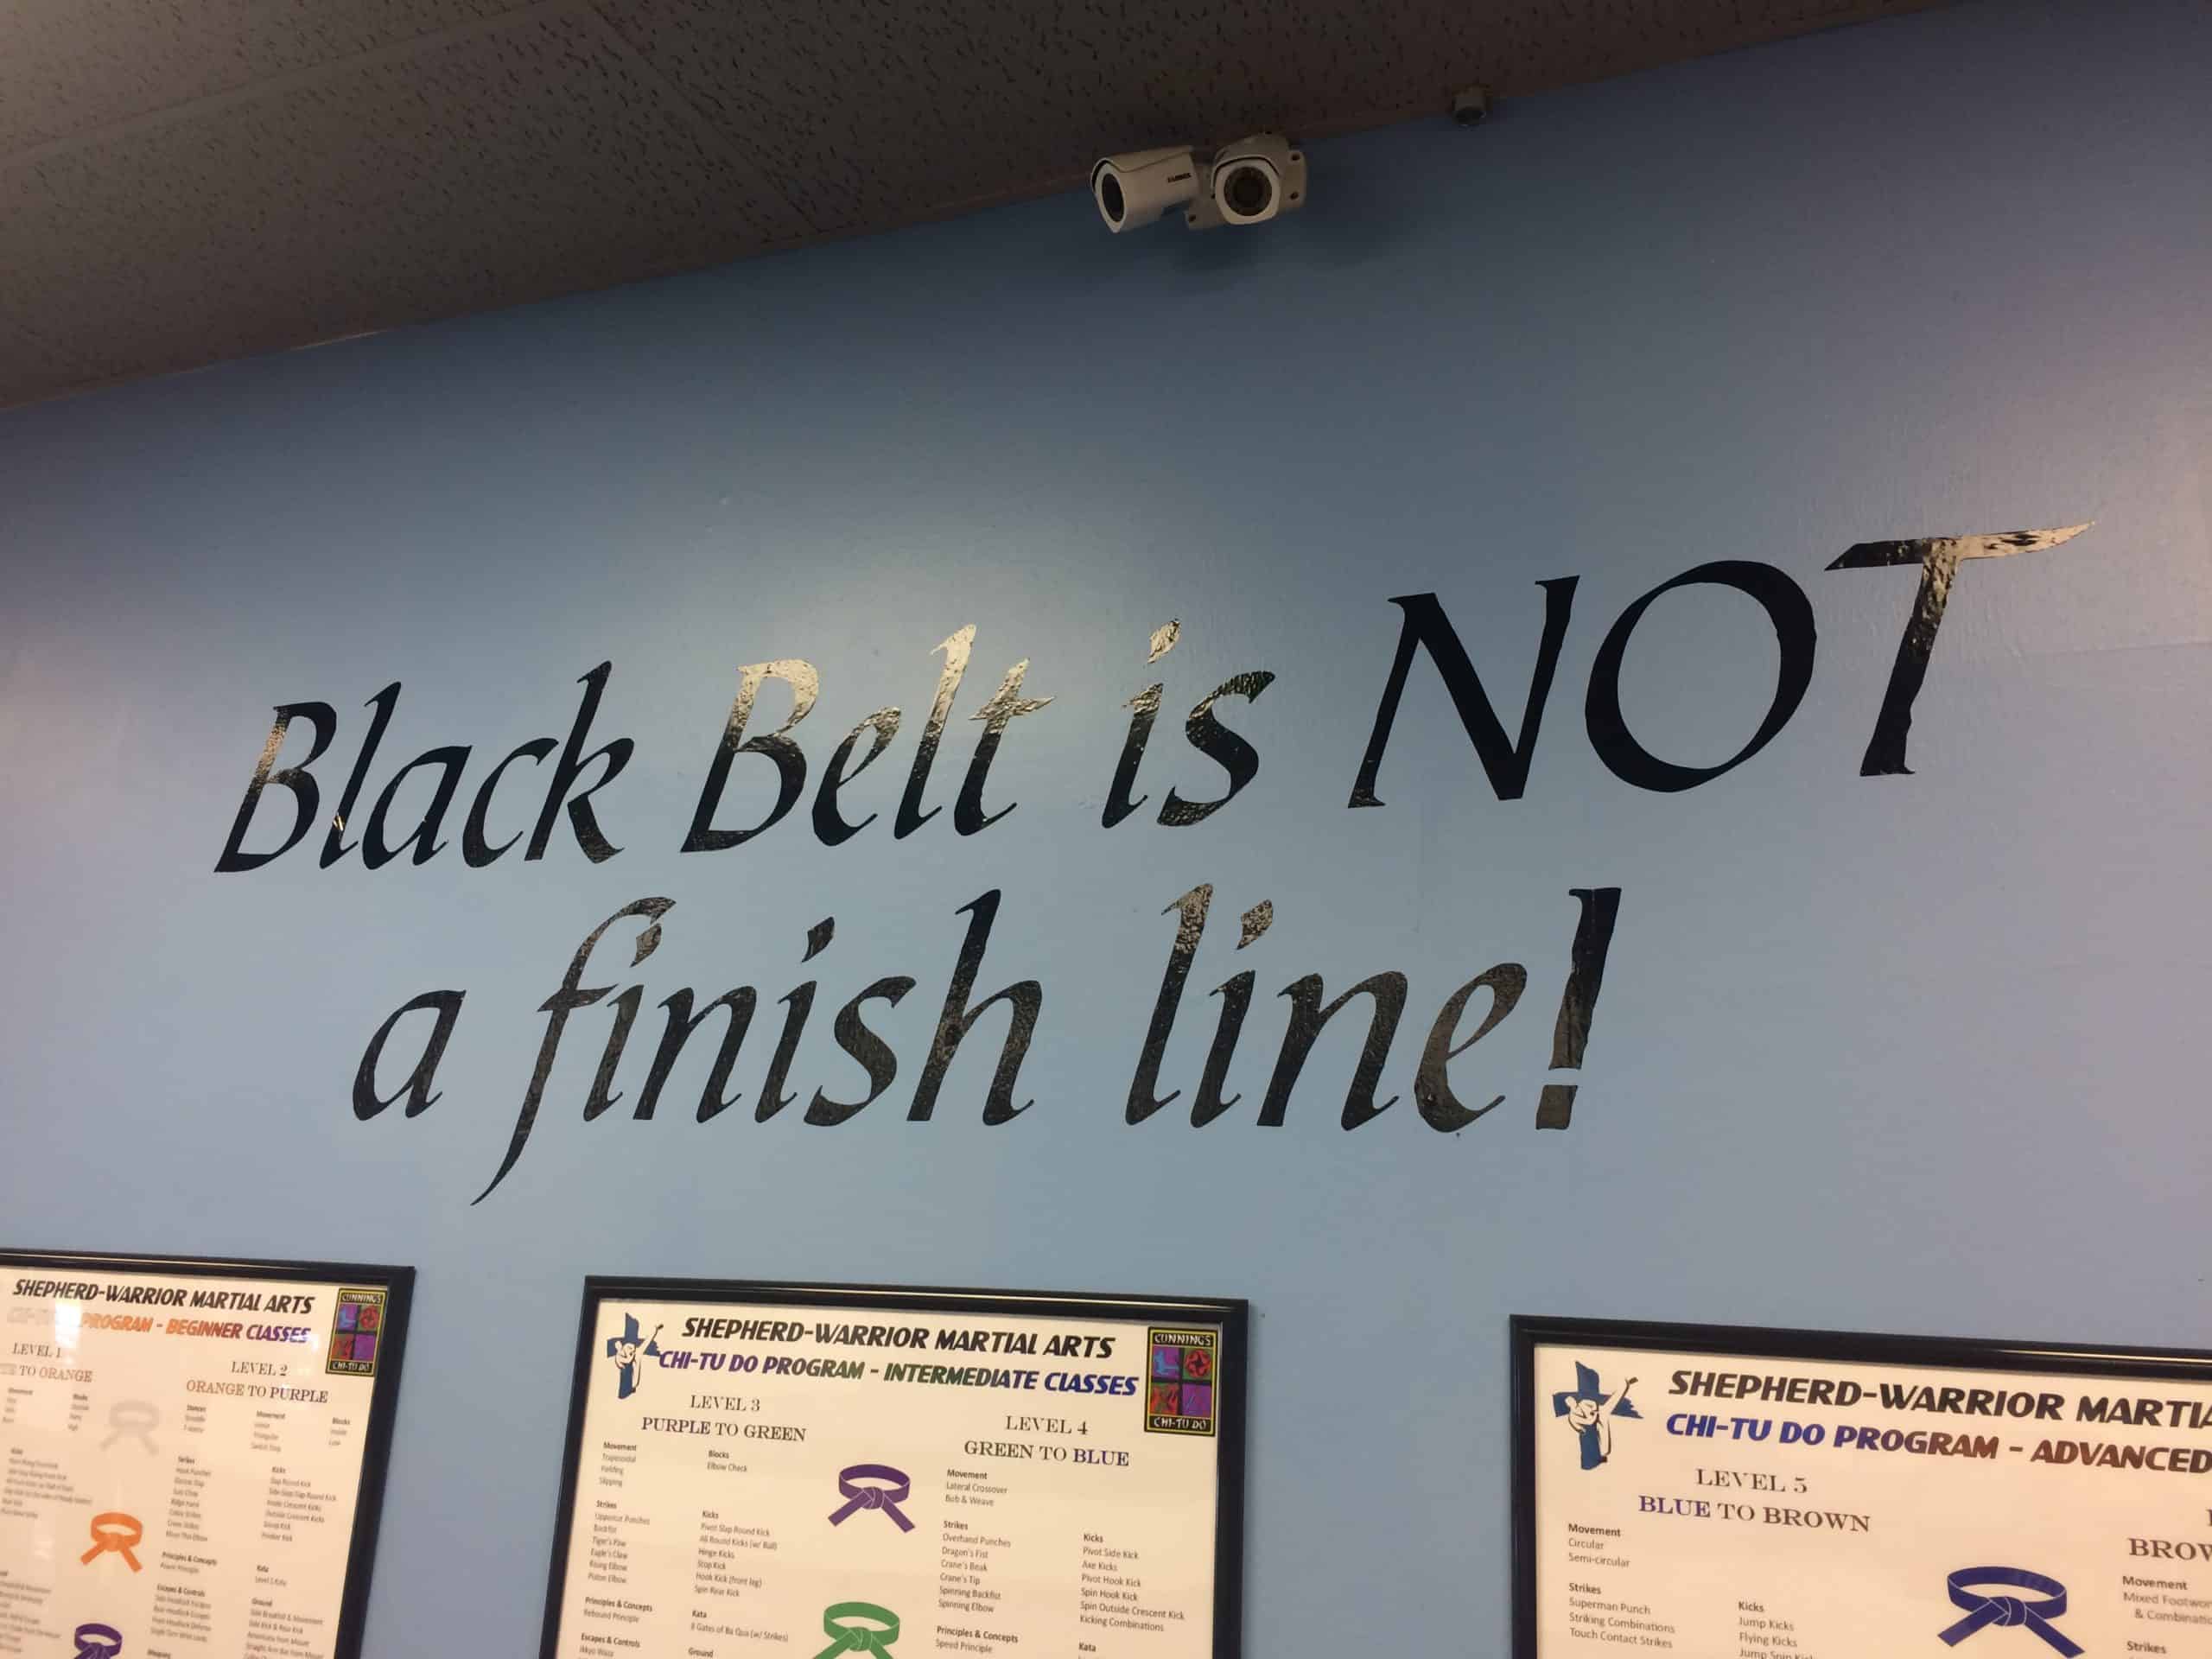 Interior wall with text "Black Belt is NOT a finish line!" at Shepherd-Warrior Martial Arts